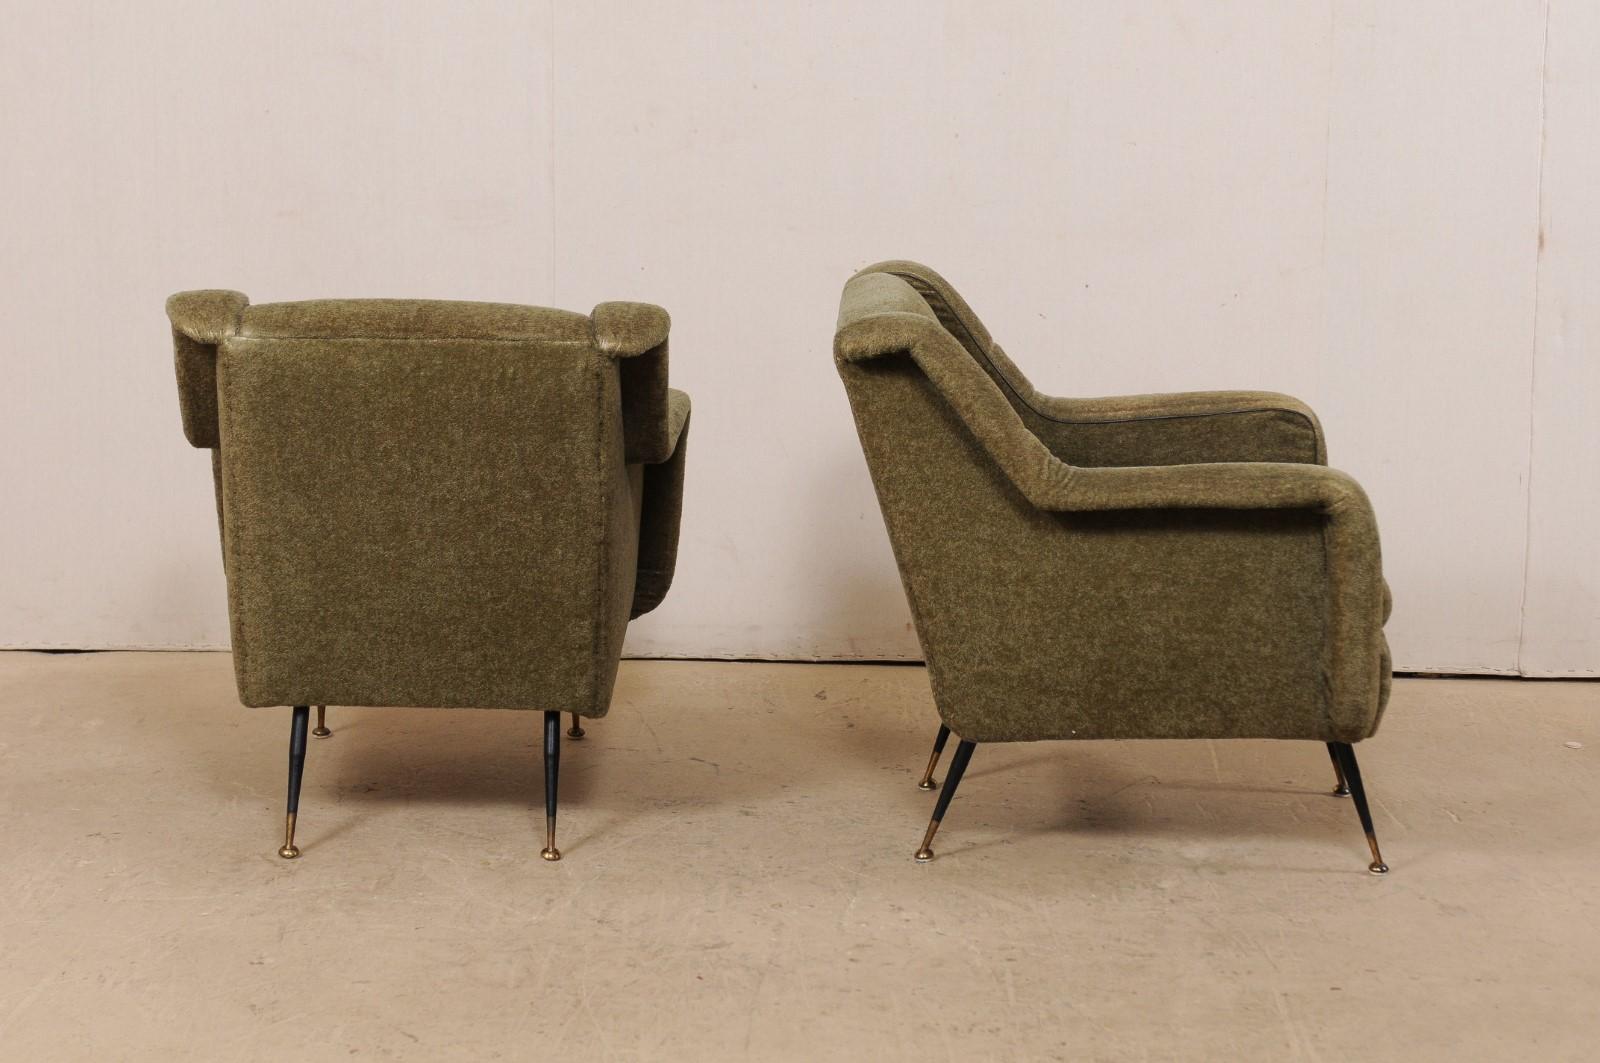 Pair of Mid-Century Modern Upholstered Club Chairs from Italy with Iron Legs 1